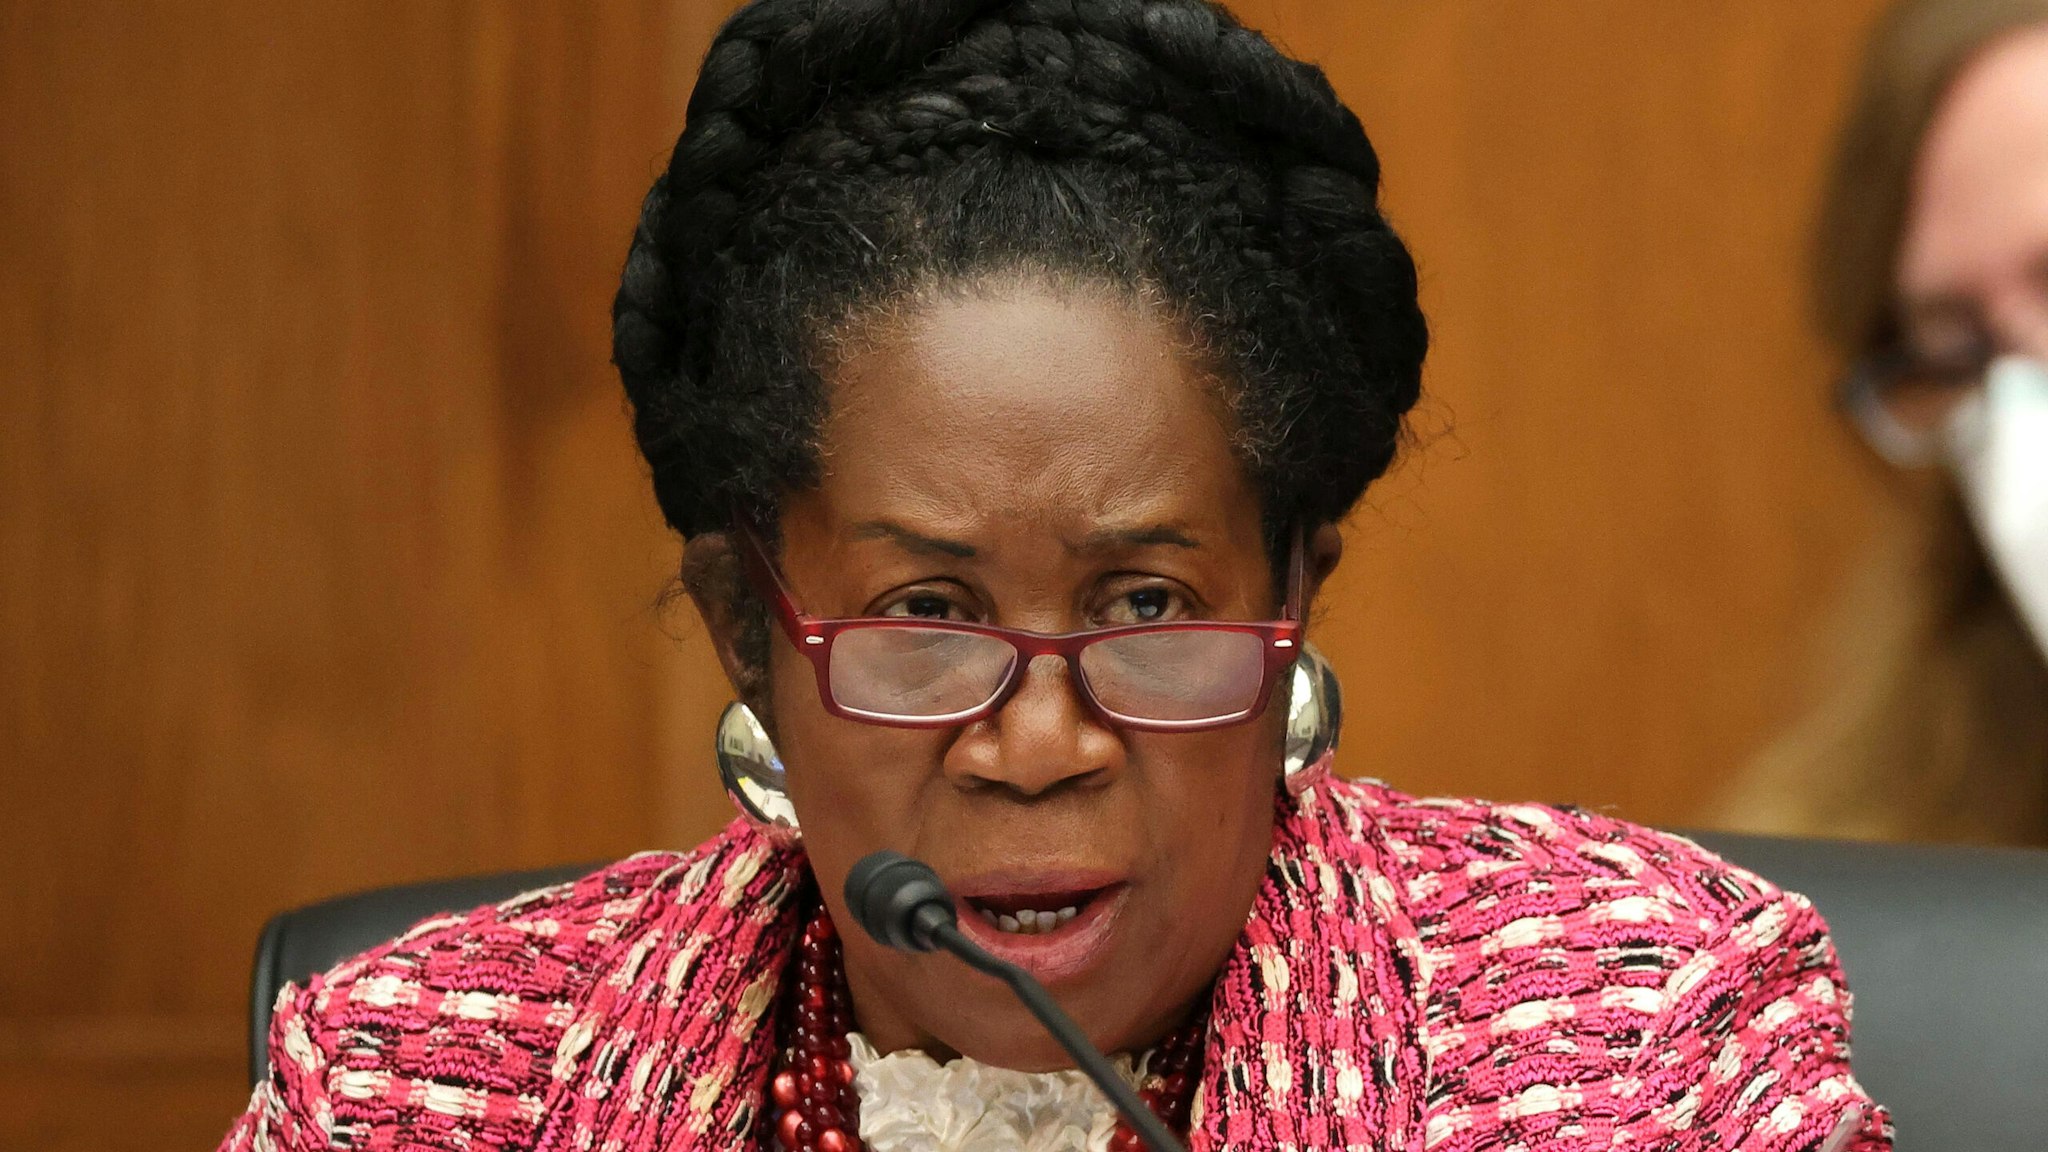 Representative Shelia Jackson Lee questions witnesses during a hearing about "Worldwide threats to the Homeland" on Capitol Hill on September 17, 2020 in Washington, DC.